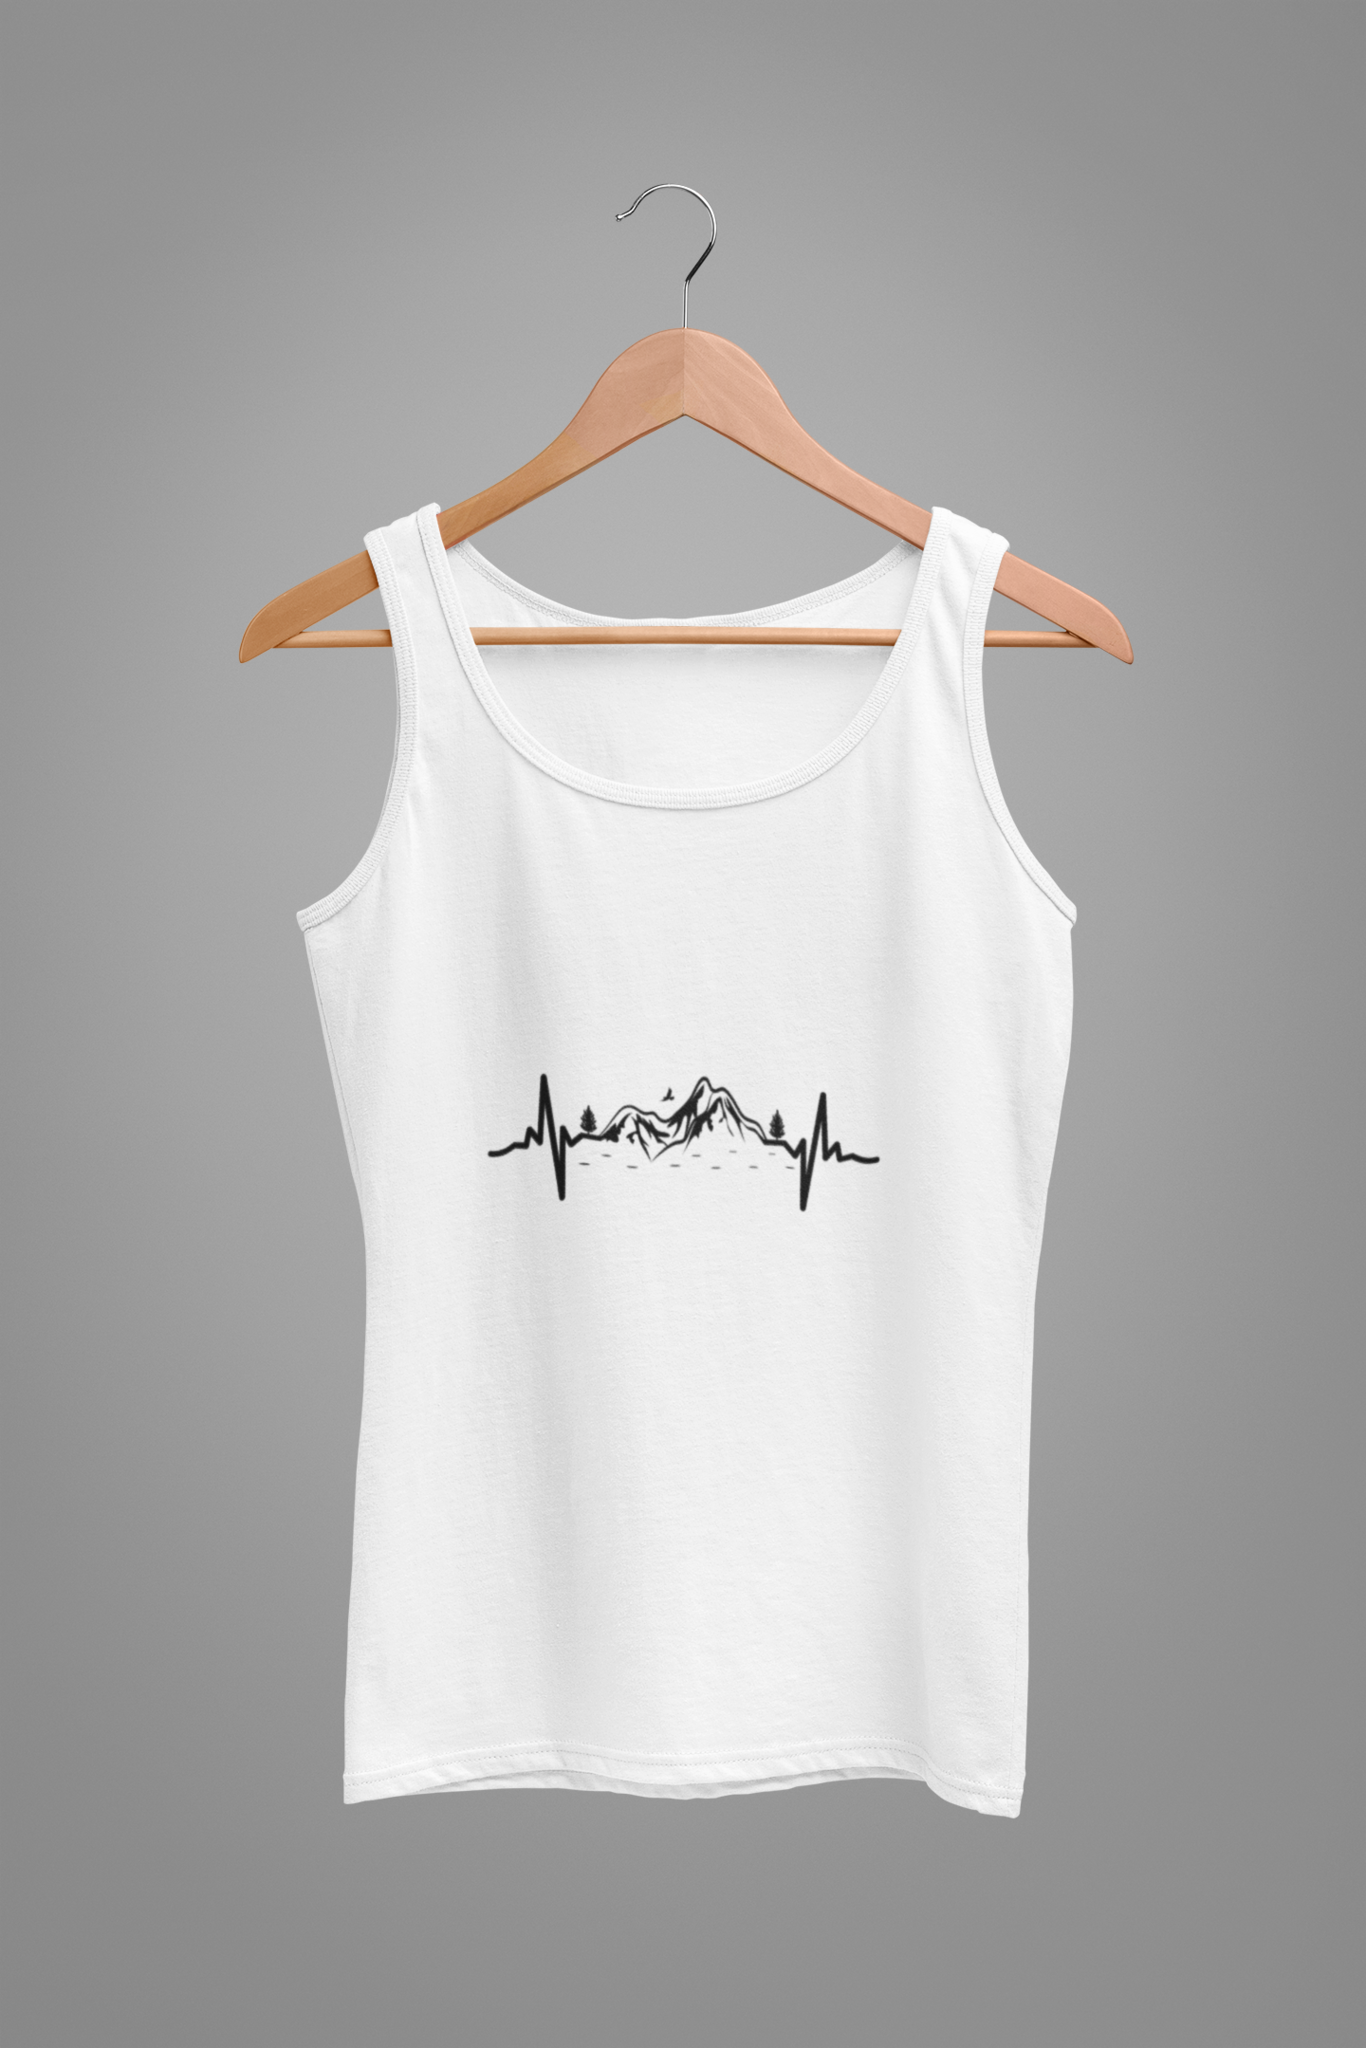 Women's Tank Top: Mountains are Calling